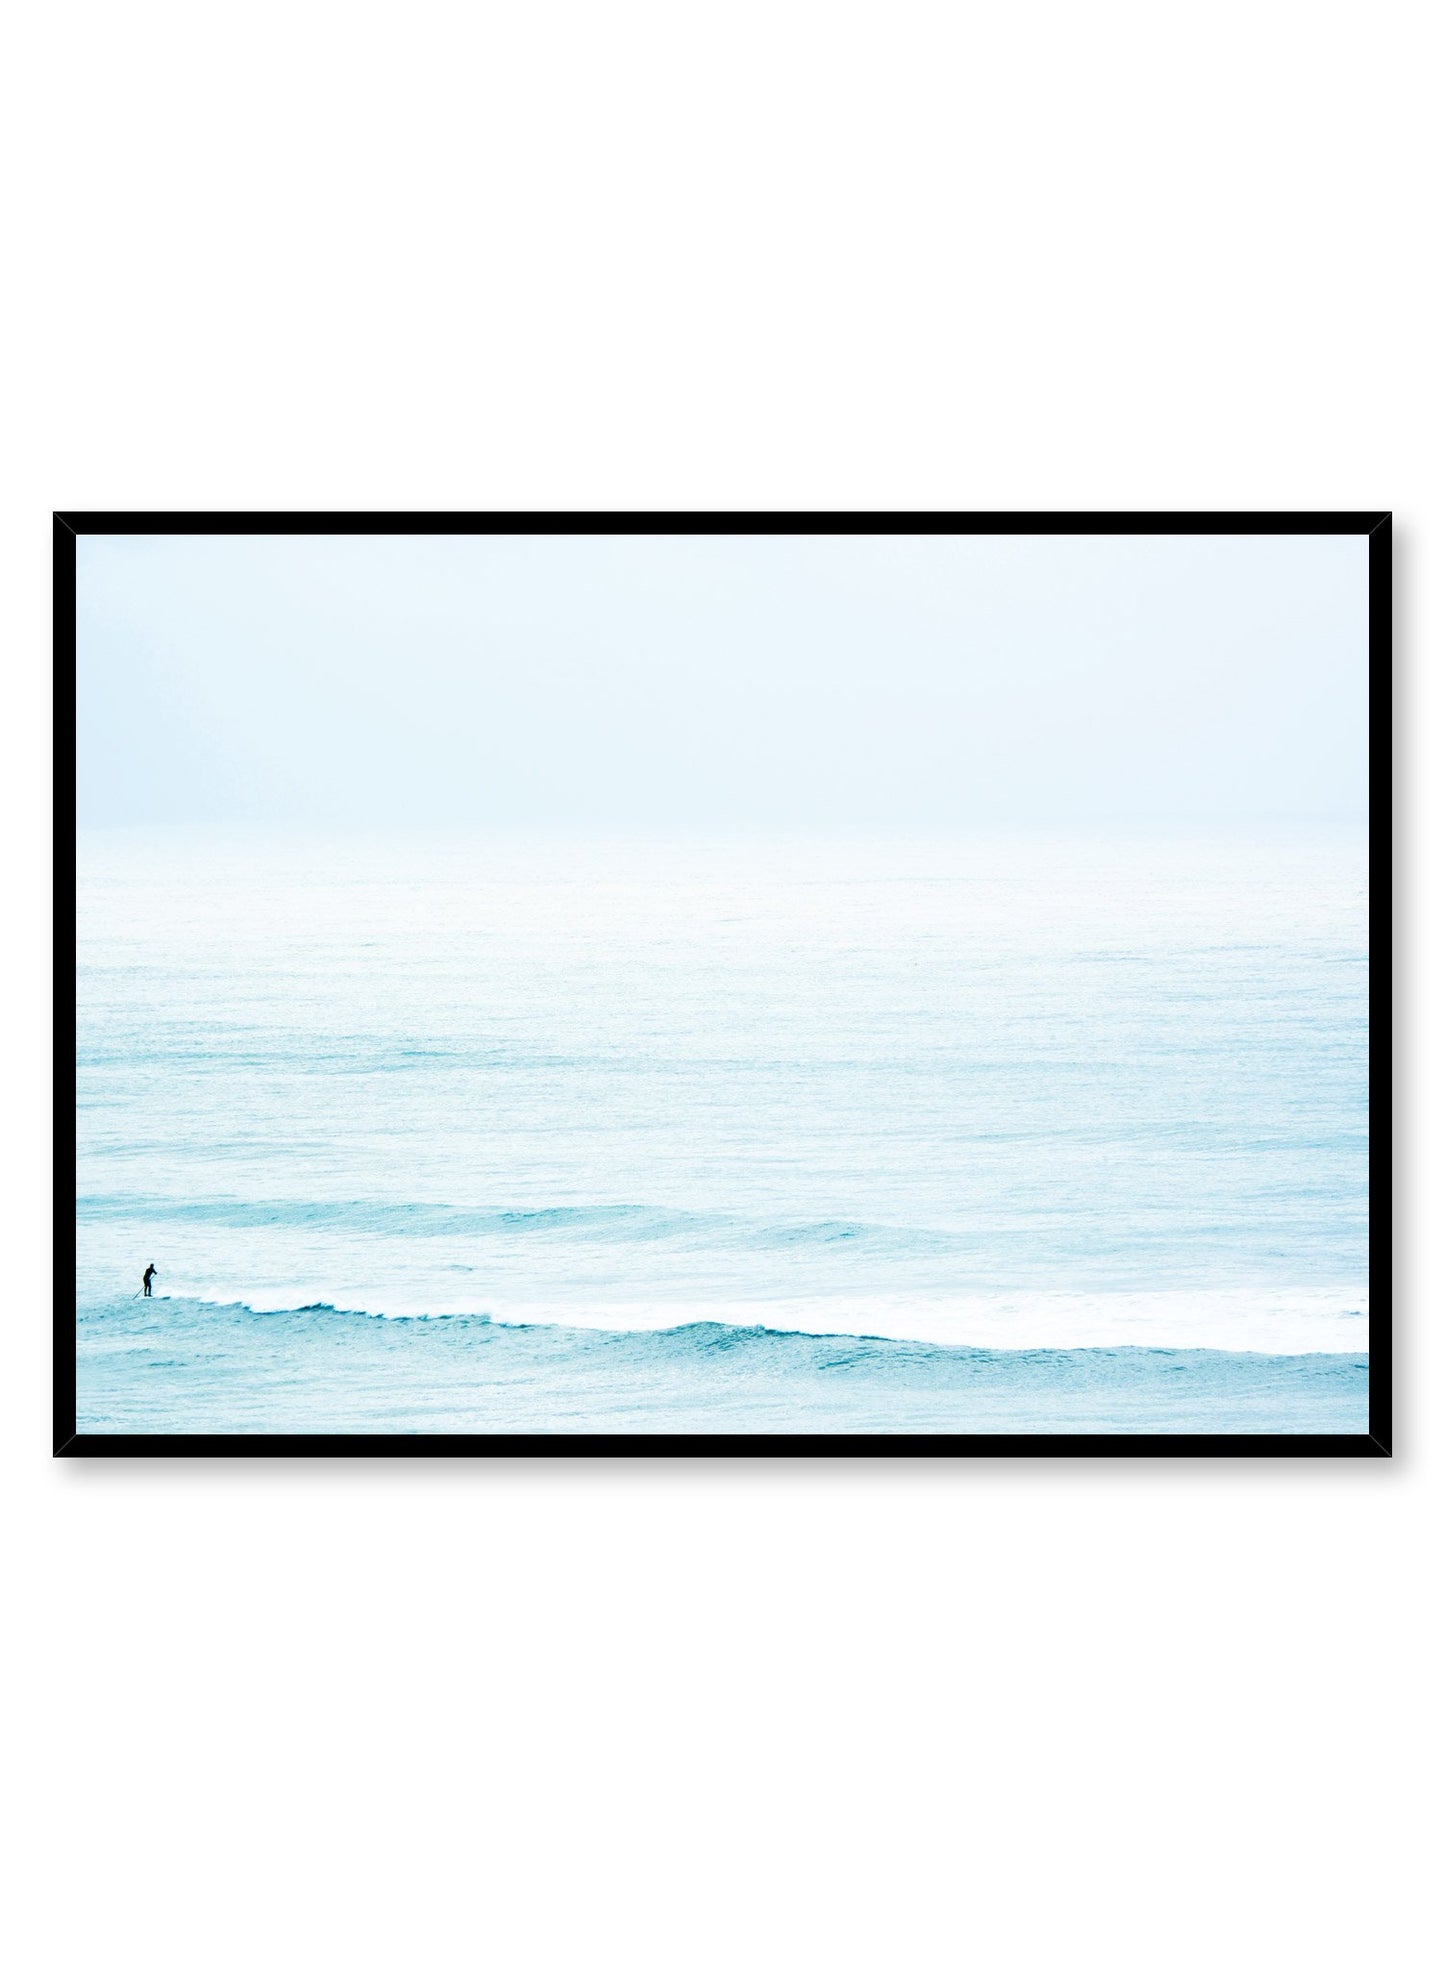 Modern minimalist photography poster by Opposite Wall with blue ocean waves